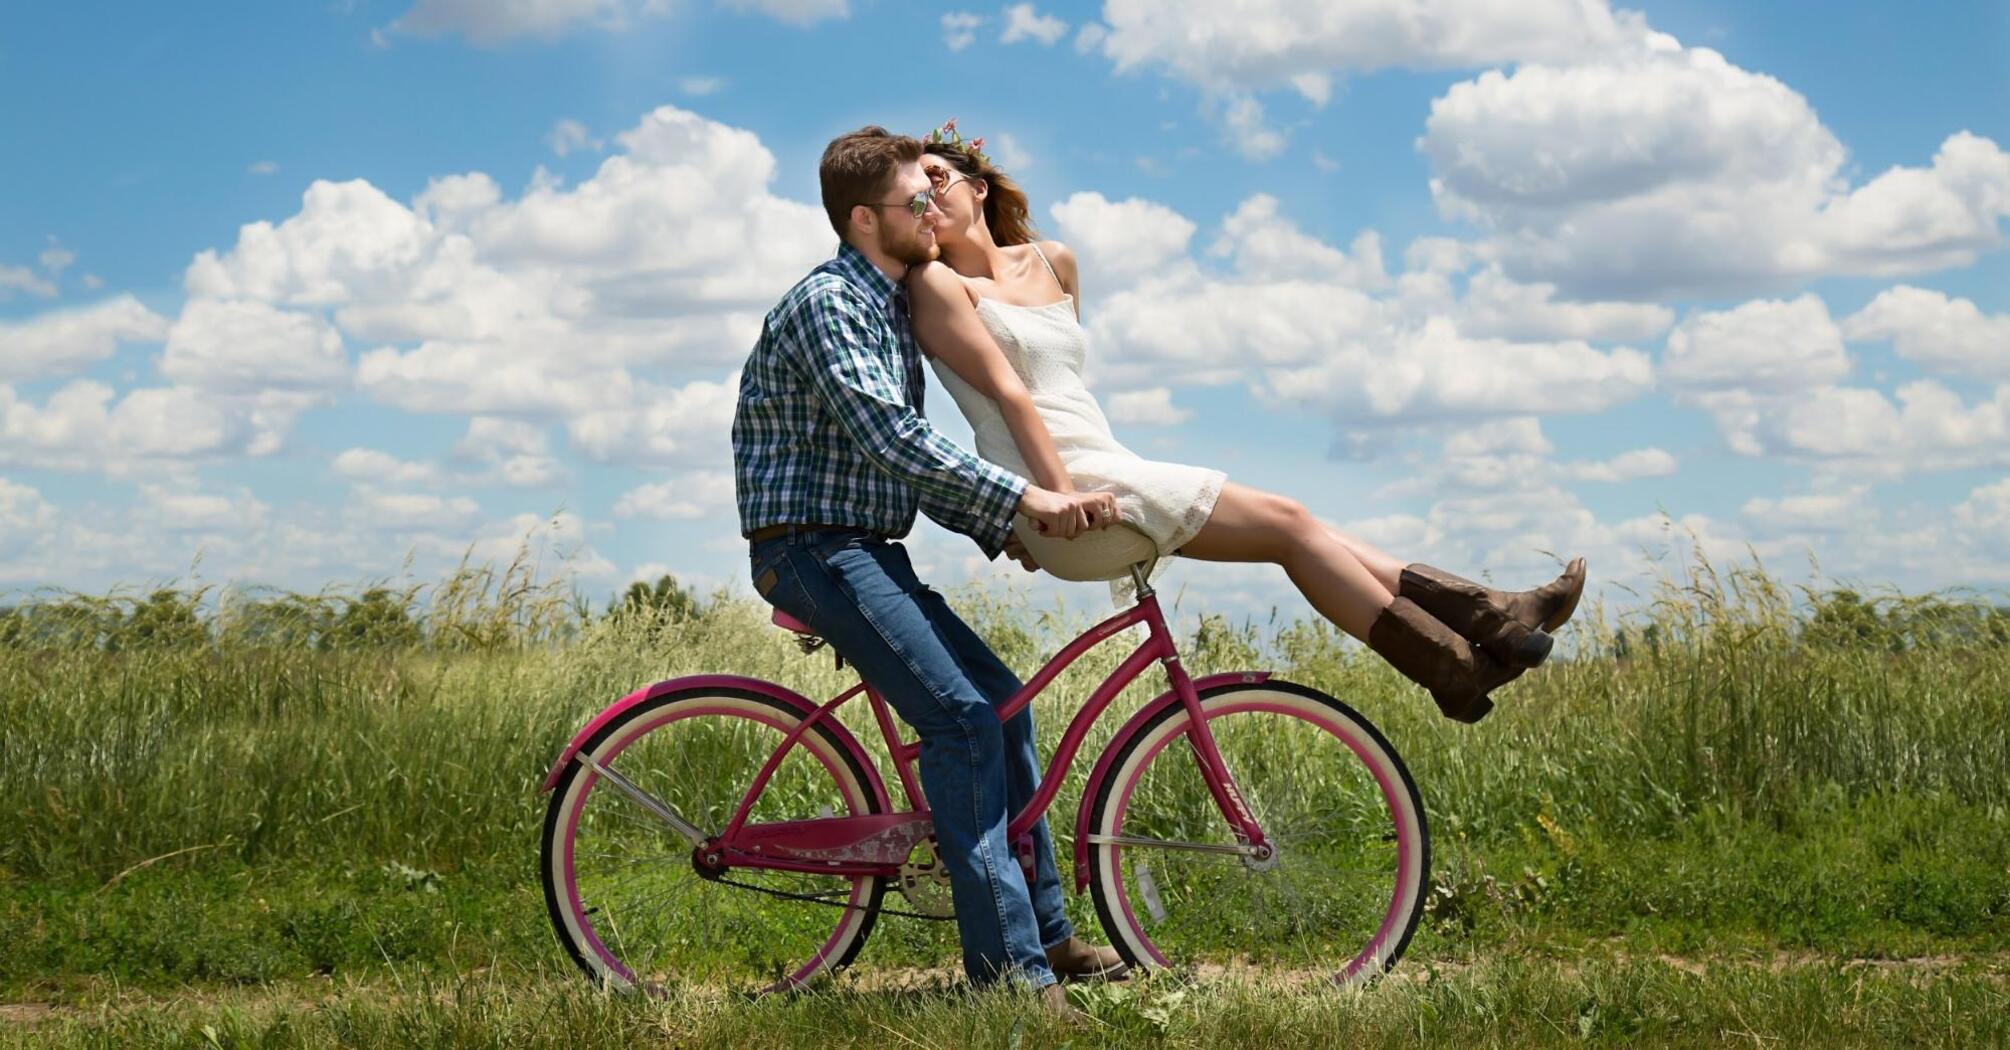 Couple is riding a bicycle in a field